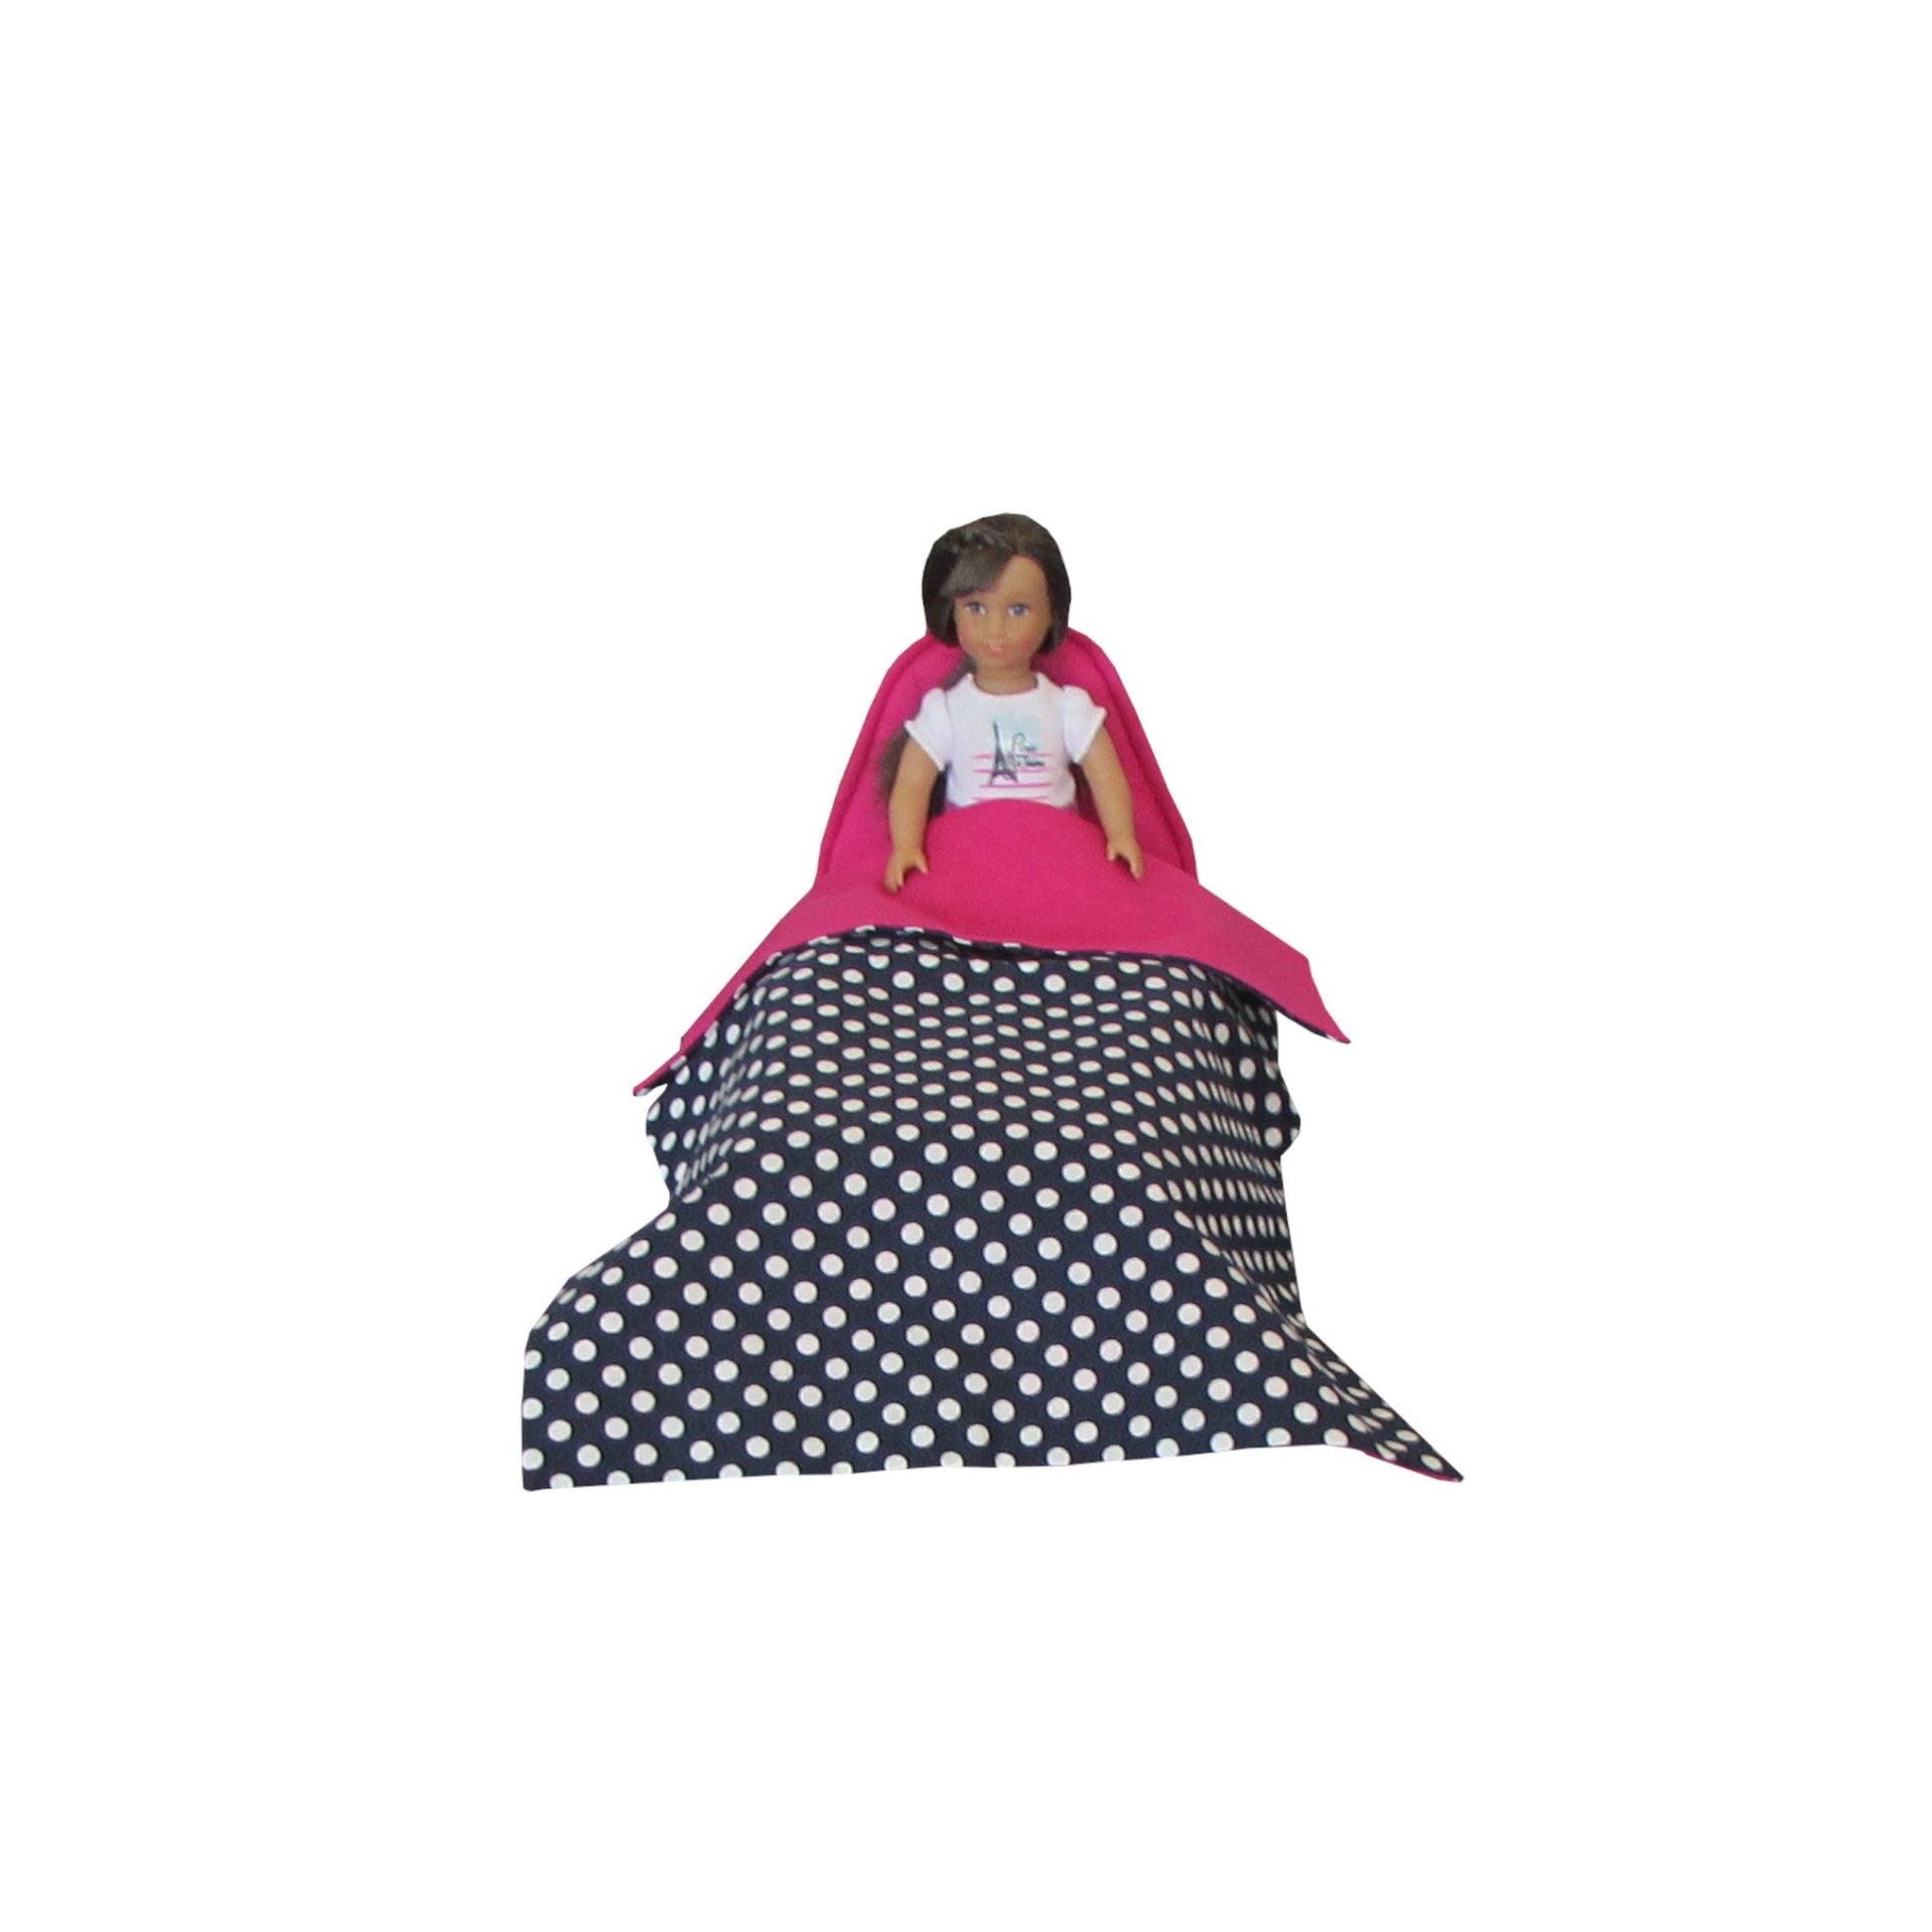 Bright Pink Doll Bed and Dots Dark Blue Doll Bedding for 6.5-inch dolls with doll Second view